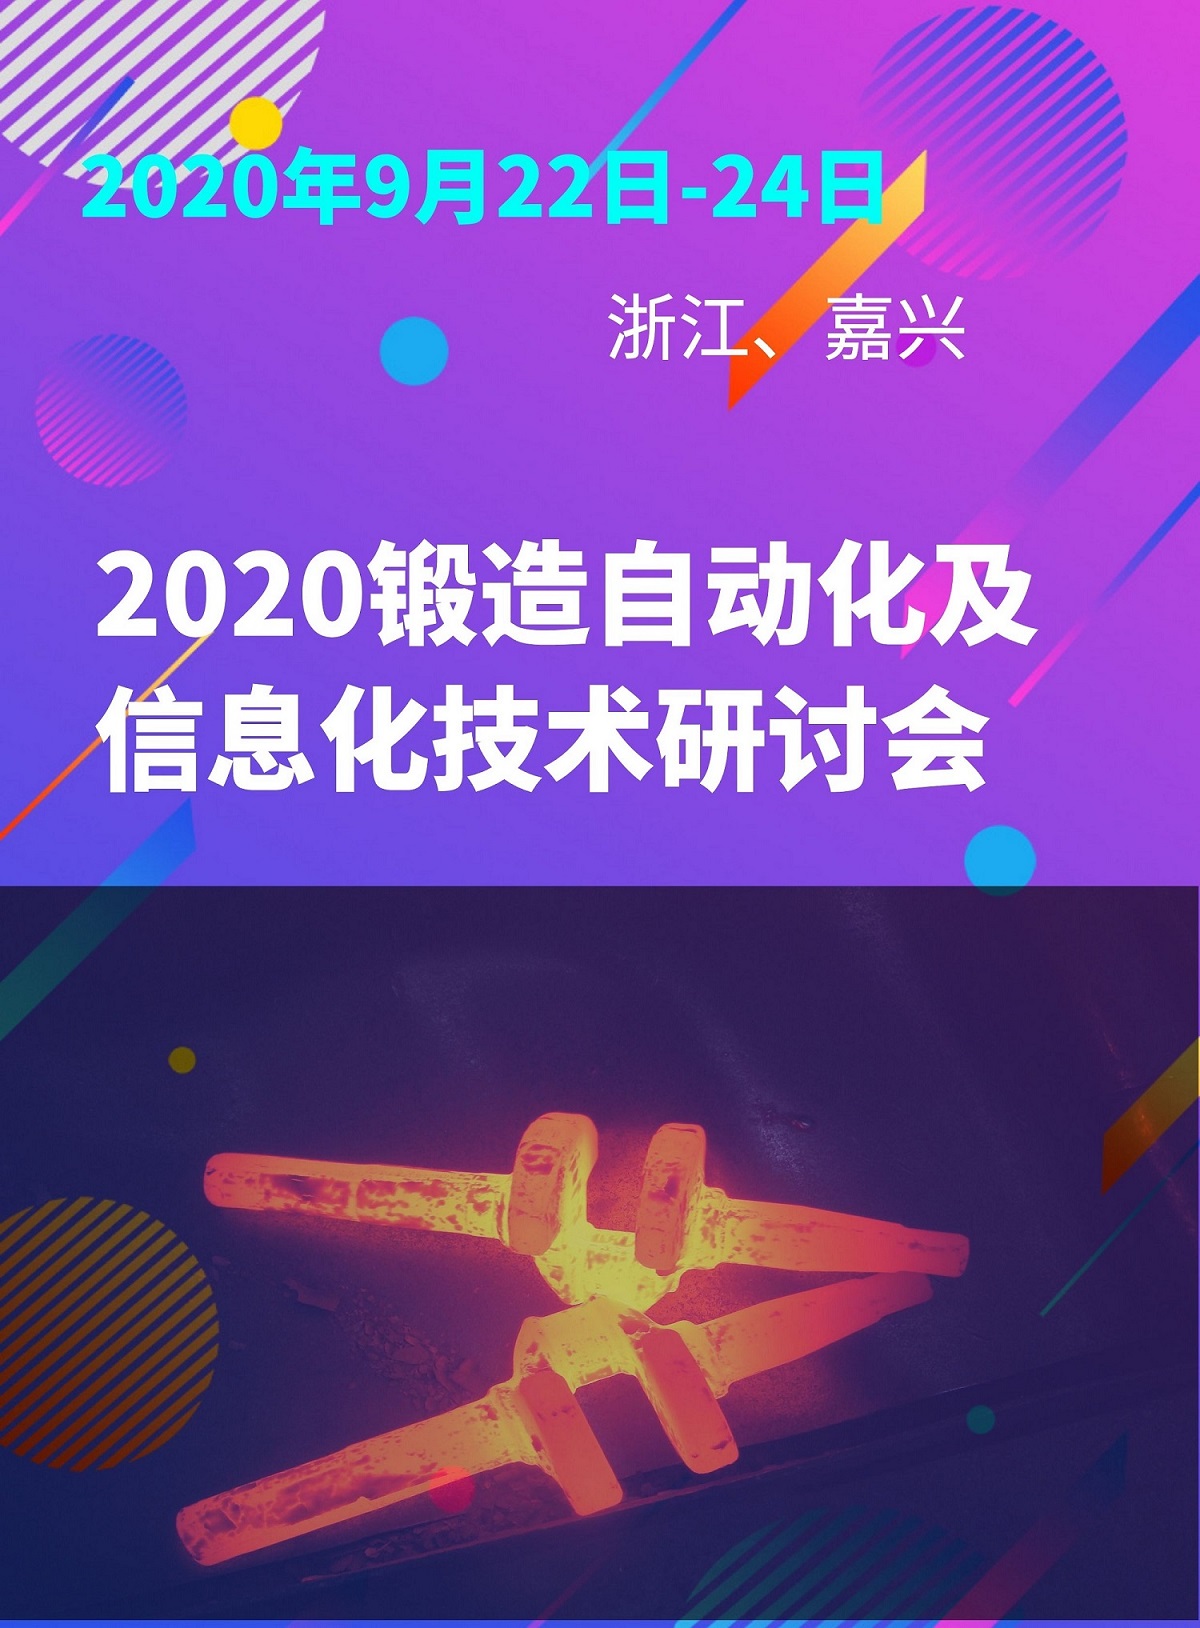 Hengjia meeting --2020 Workshop on forging automation and information Technology